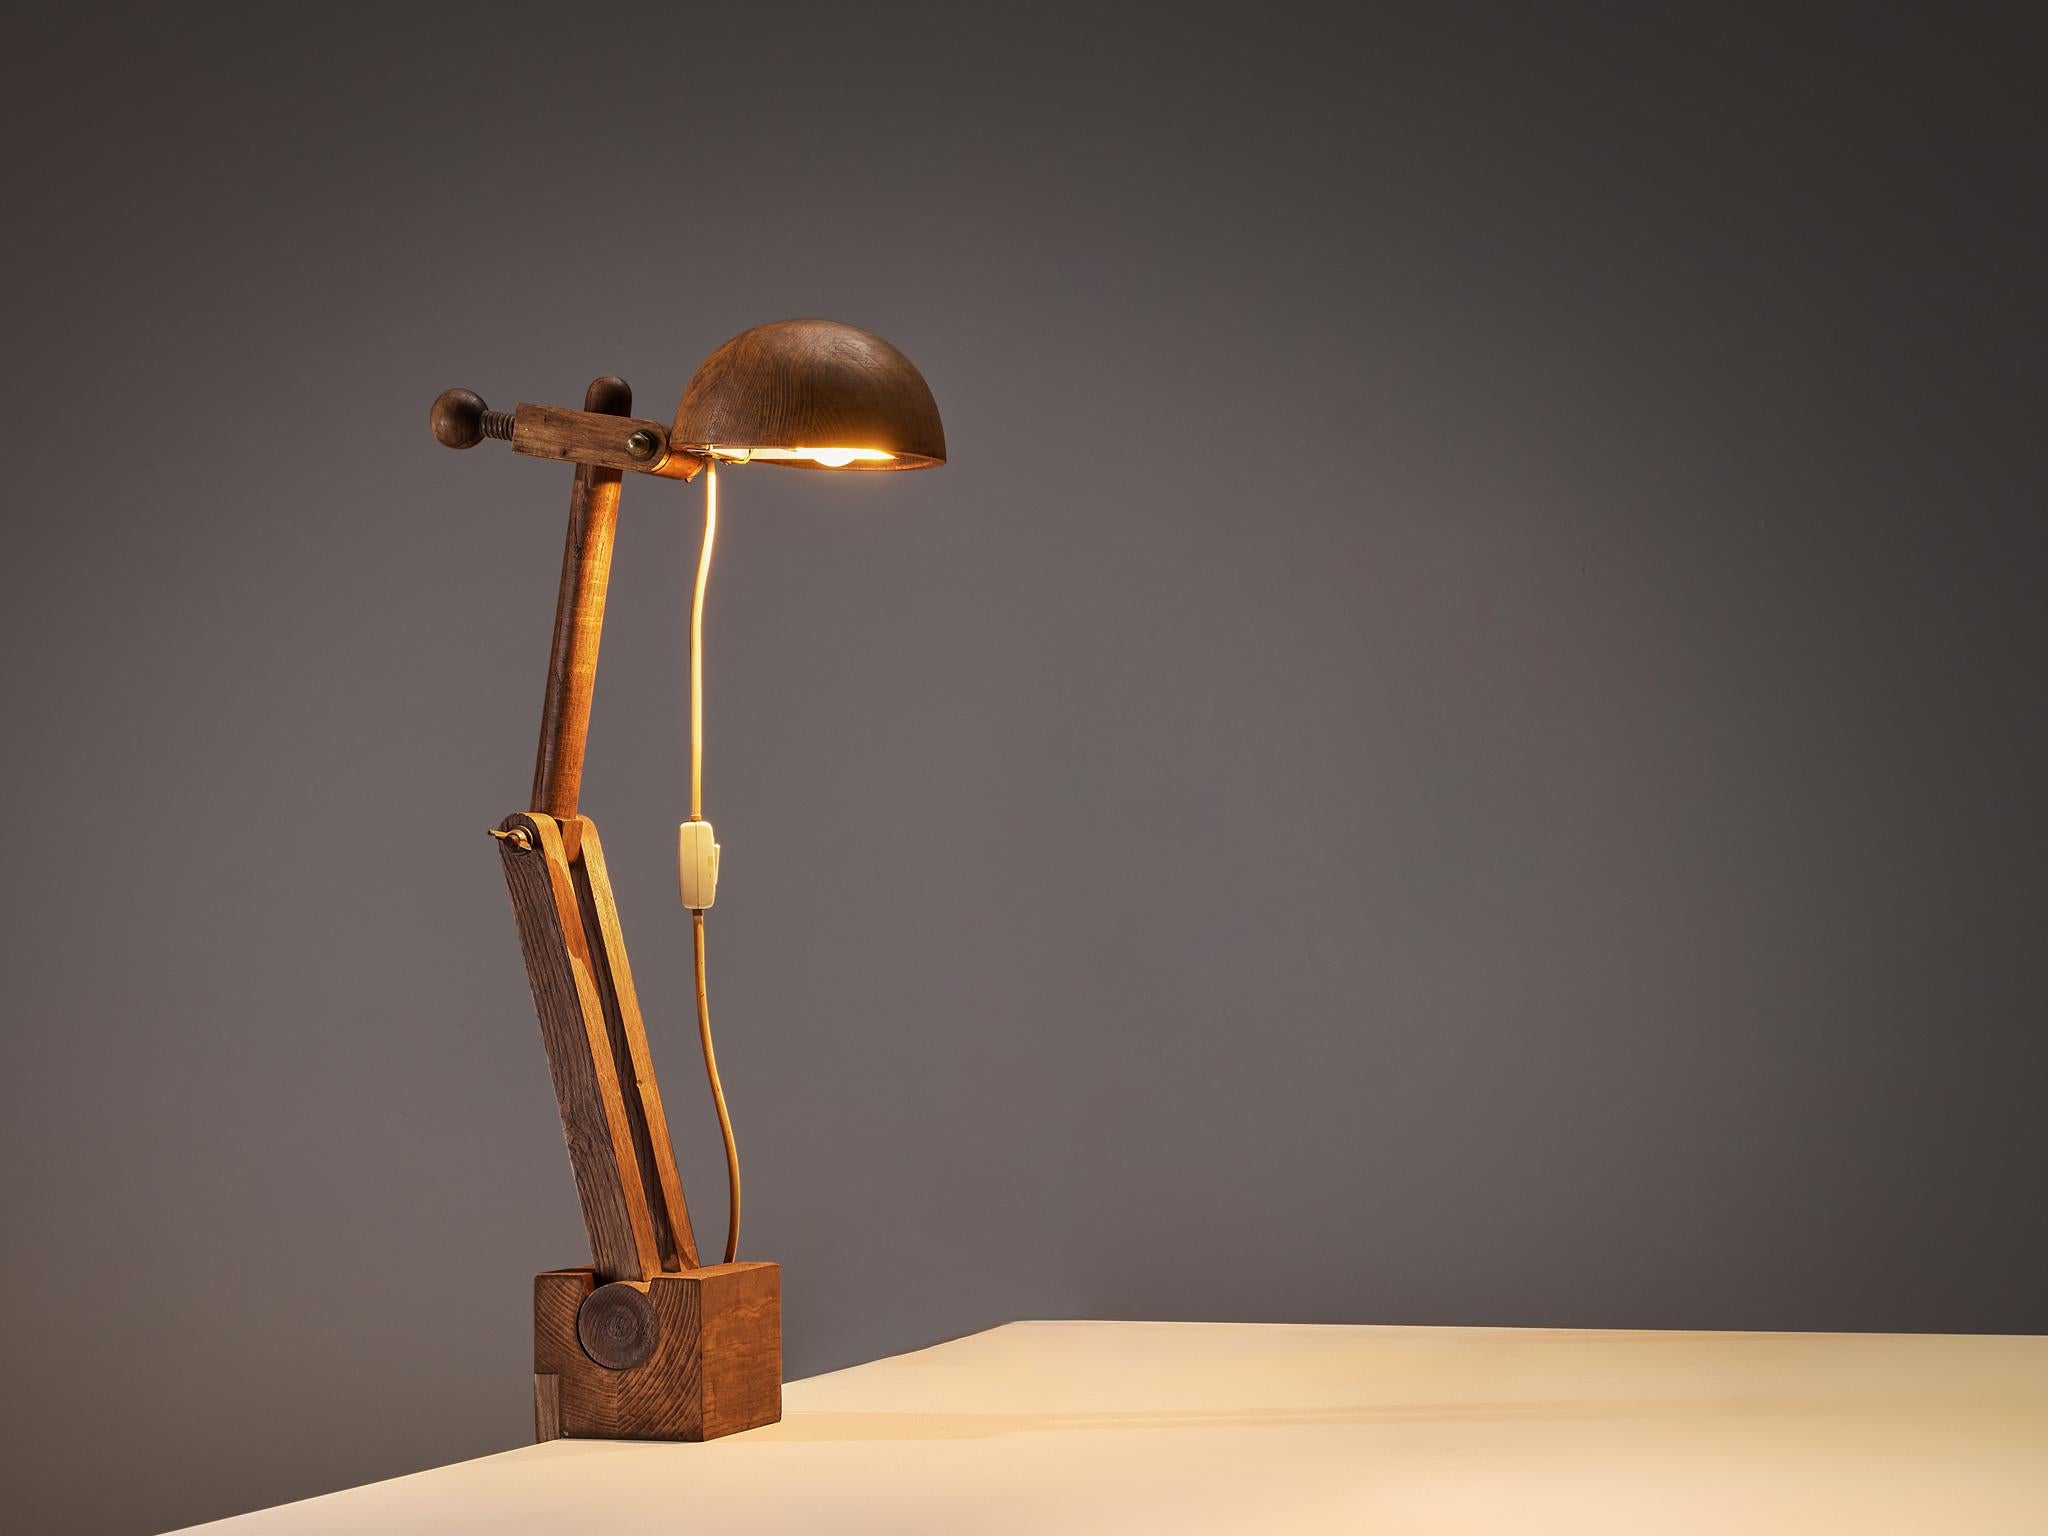 Paolo Pallucco for Pallucco Roma, desk lamp, chestnut, Italy, 1960s

A distinctive clamp desk lamp, thoughtfully designed by Paolo Pallucco, not only offers functionality but also visual appeal. Crafted from solid chestnut, it features a